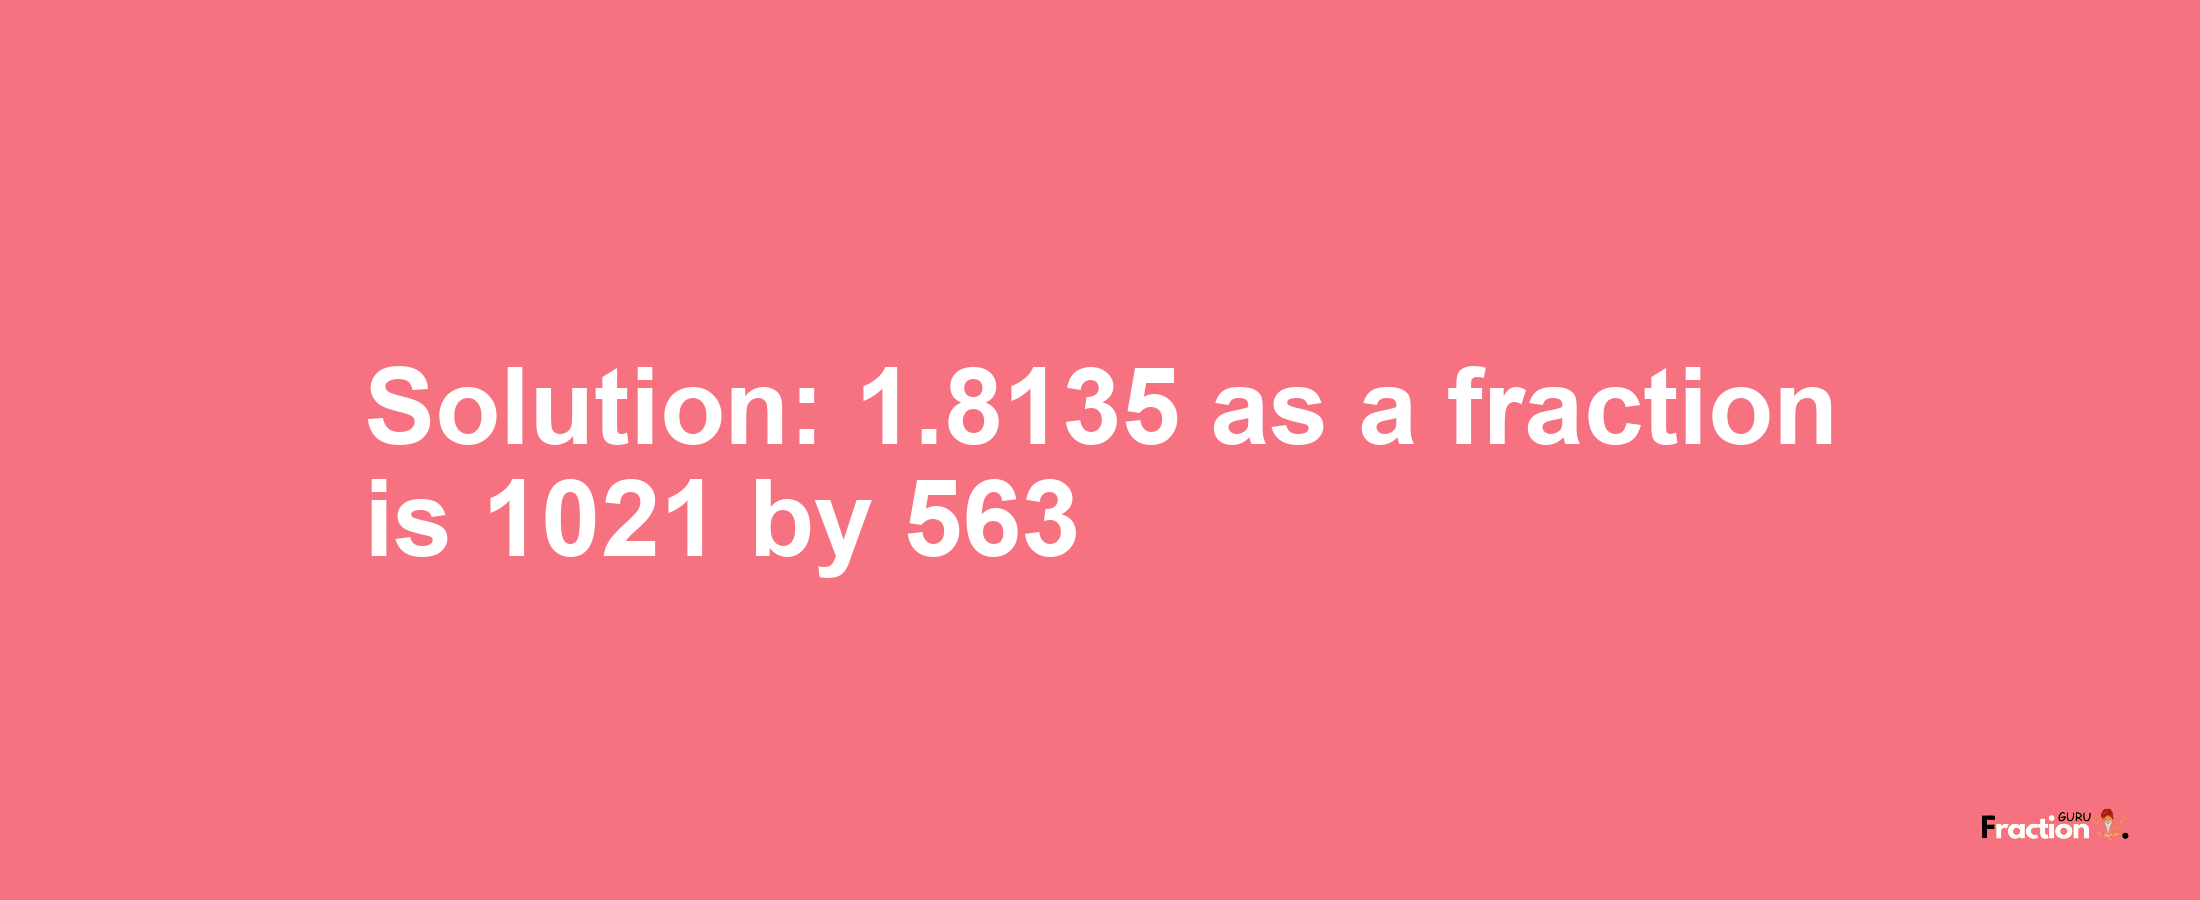 Solution:1.8135 as a fraction is 1021/563